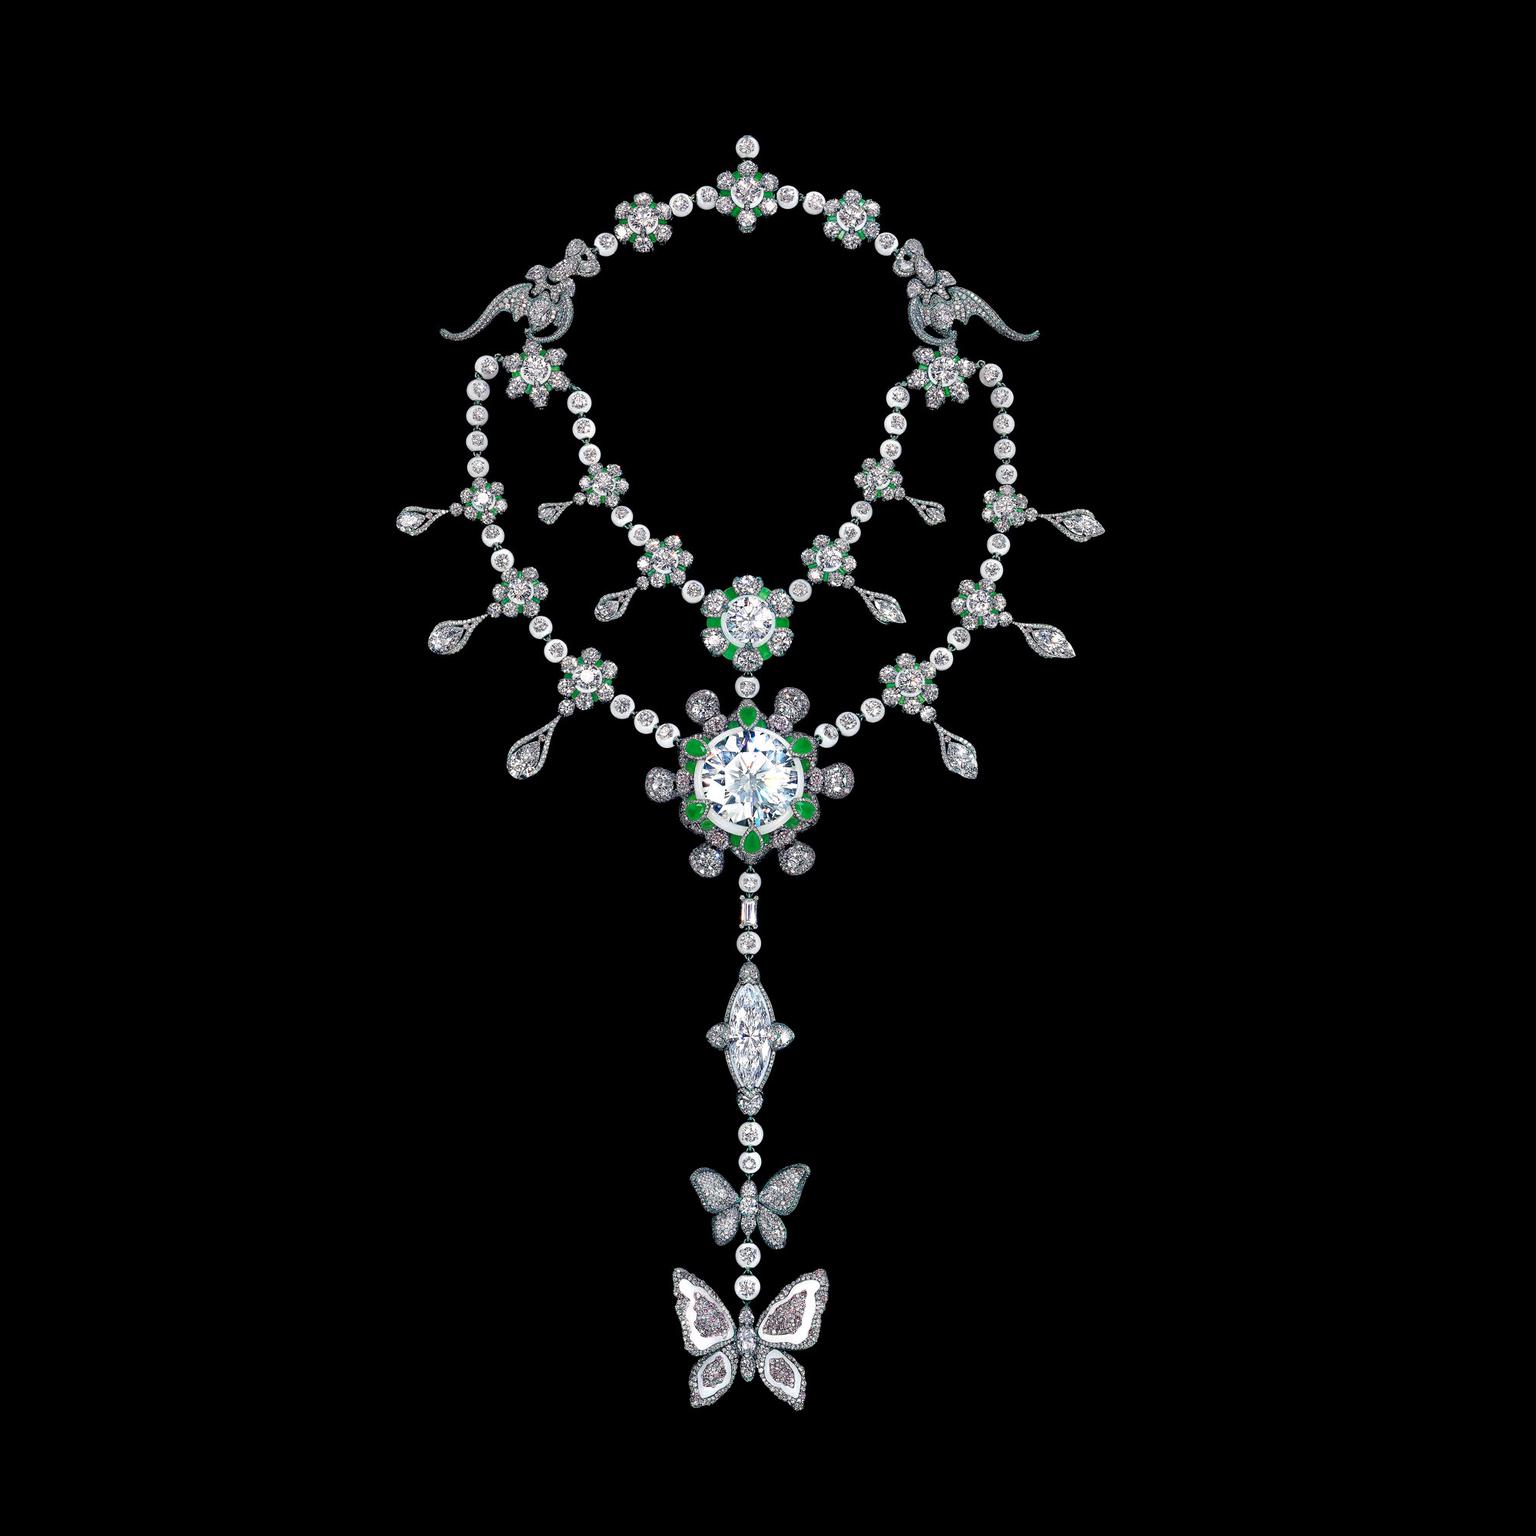 Wallace Chan A Heritage in Bloom diamond necklace